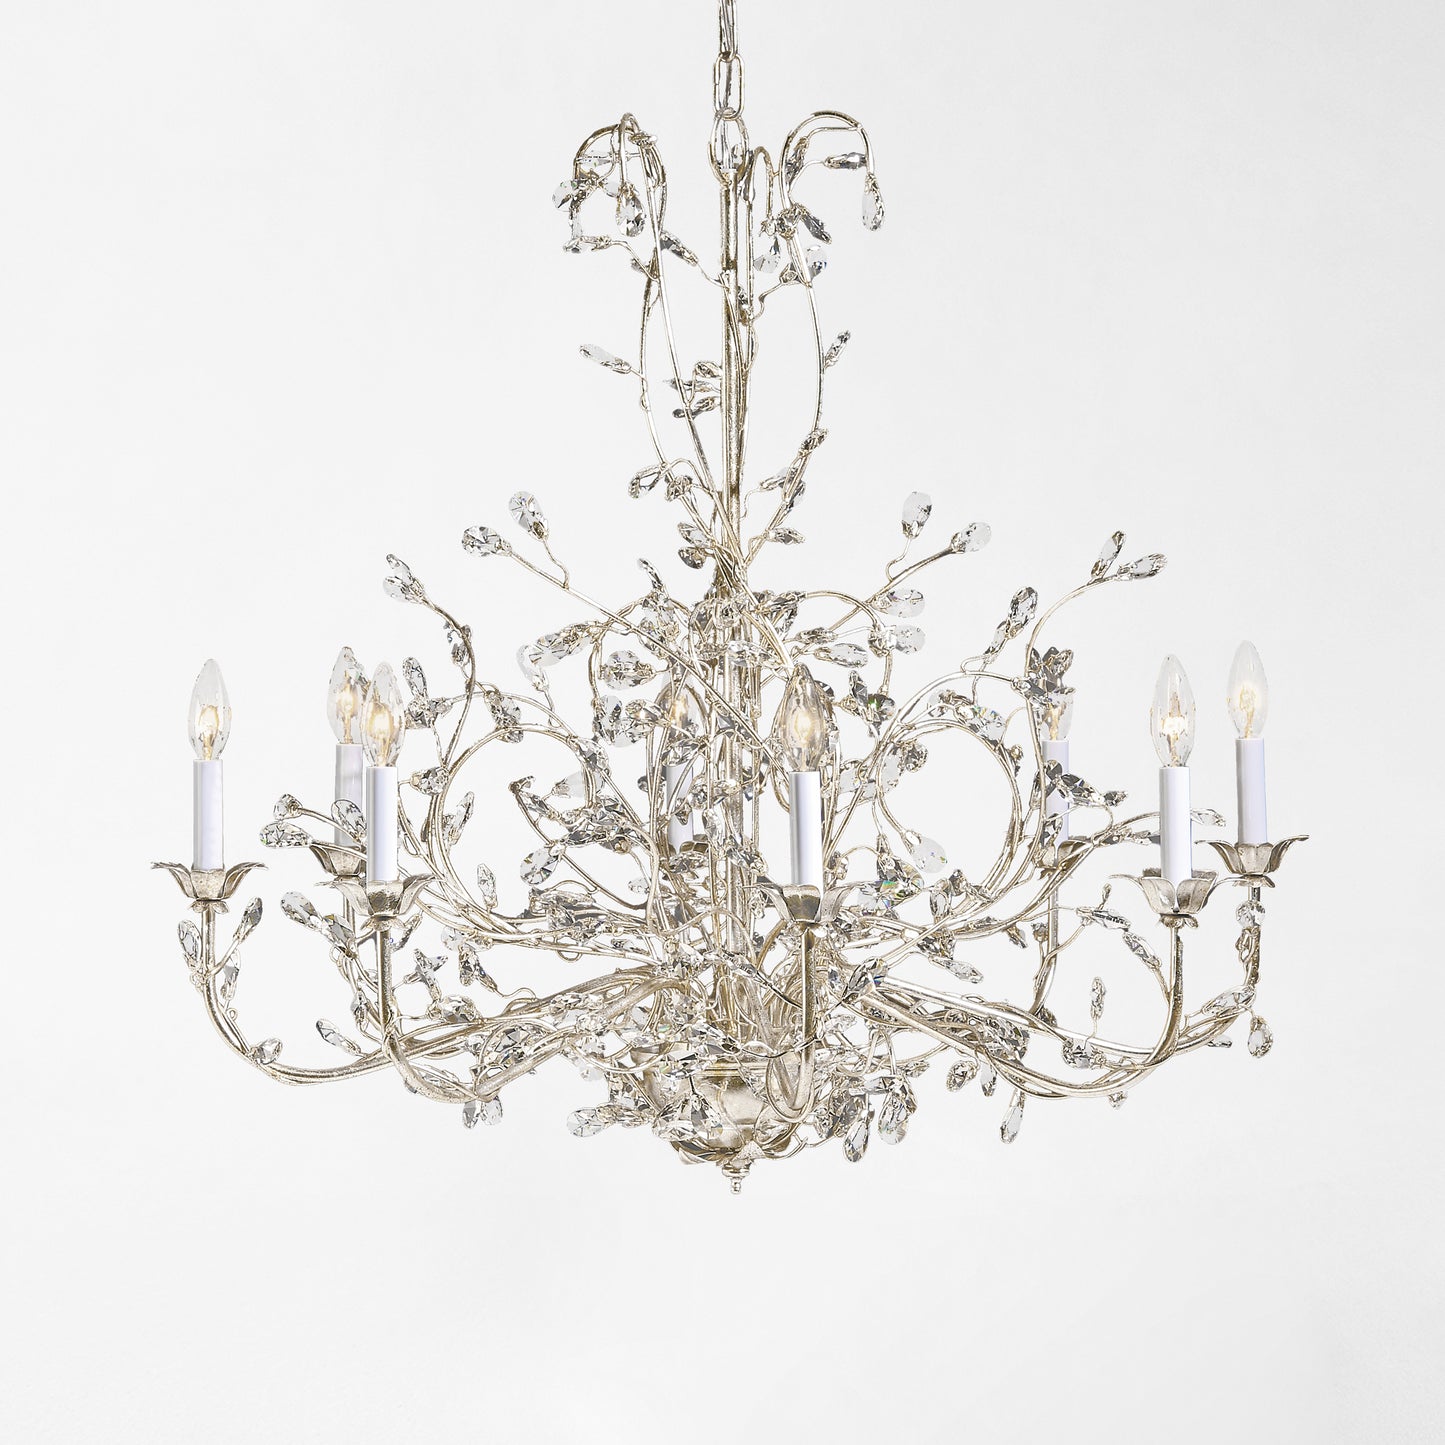 Iron chandelier with silver leaf finish and crystal drops.